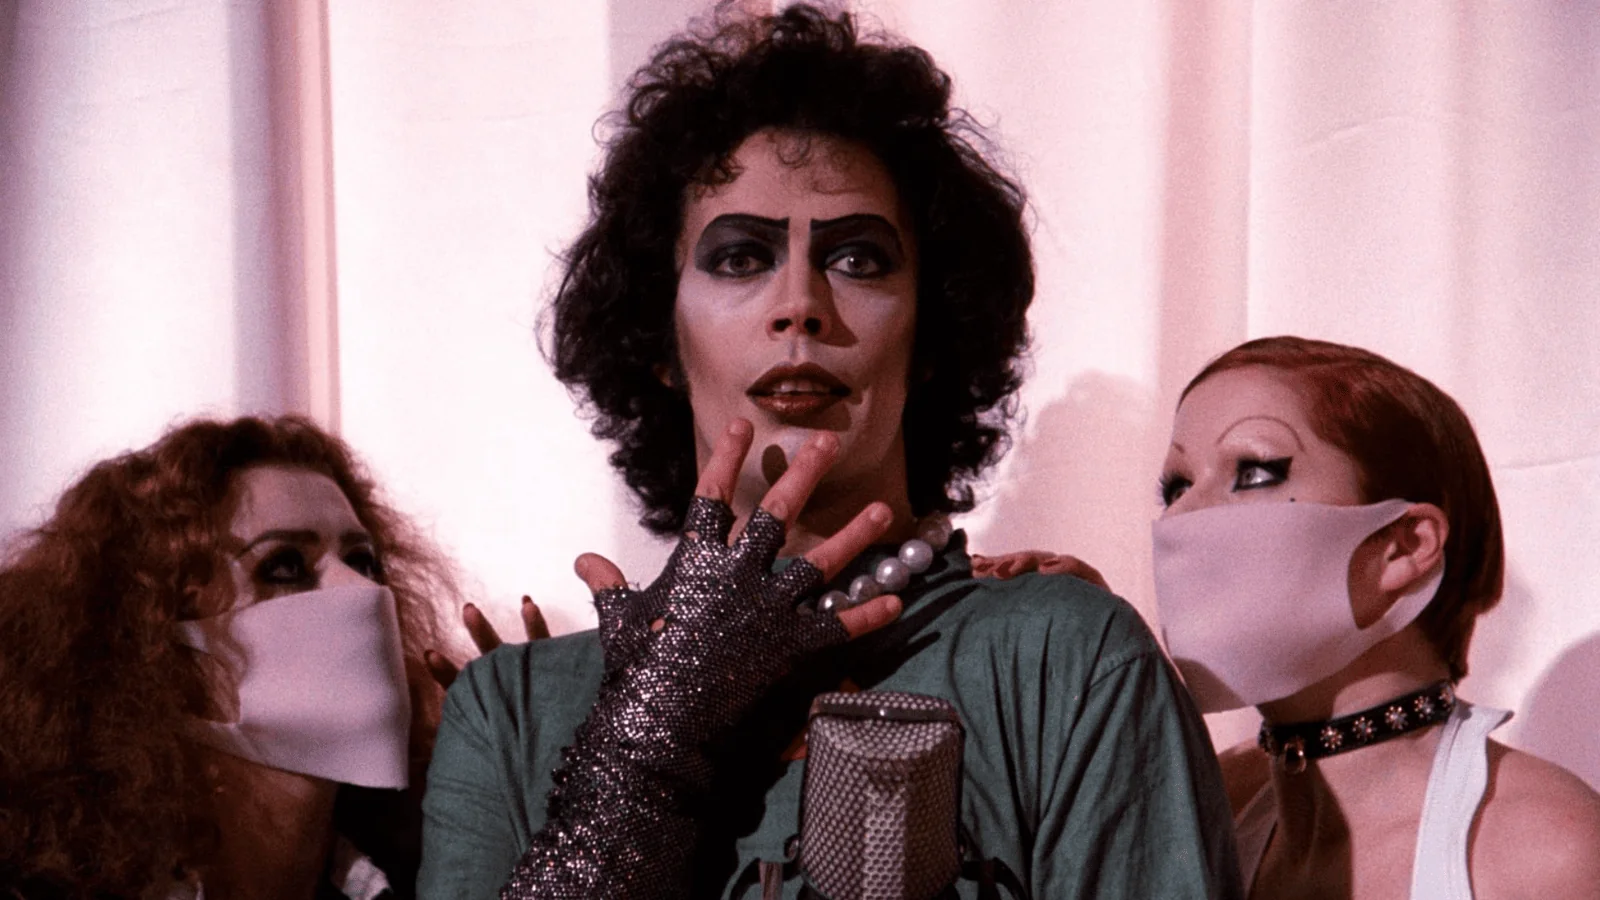 Tim Curry, The Rocky Horror Picture Show, 1975, 20th Century Studios